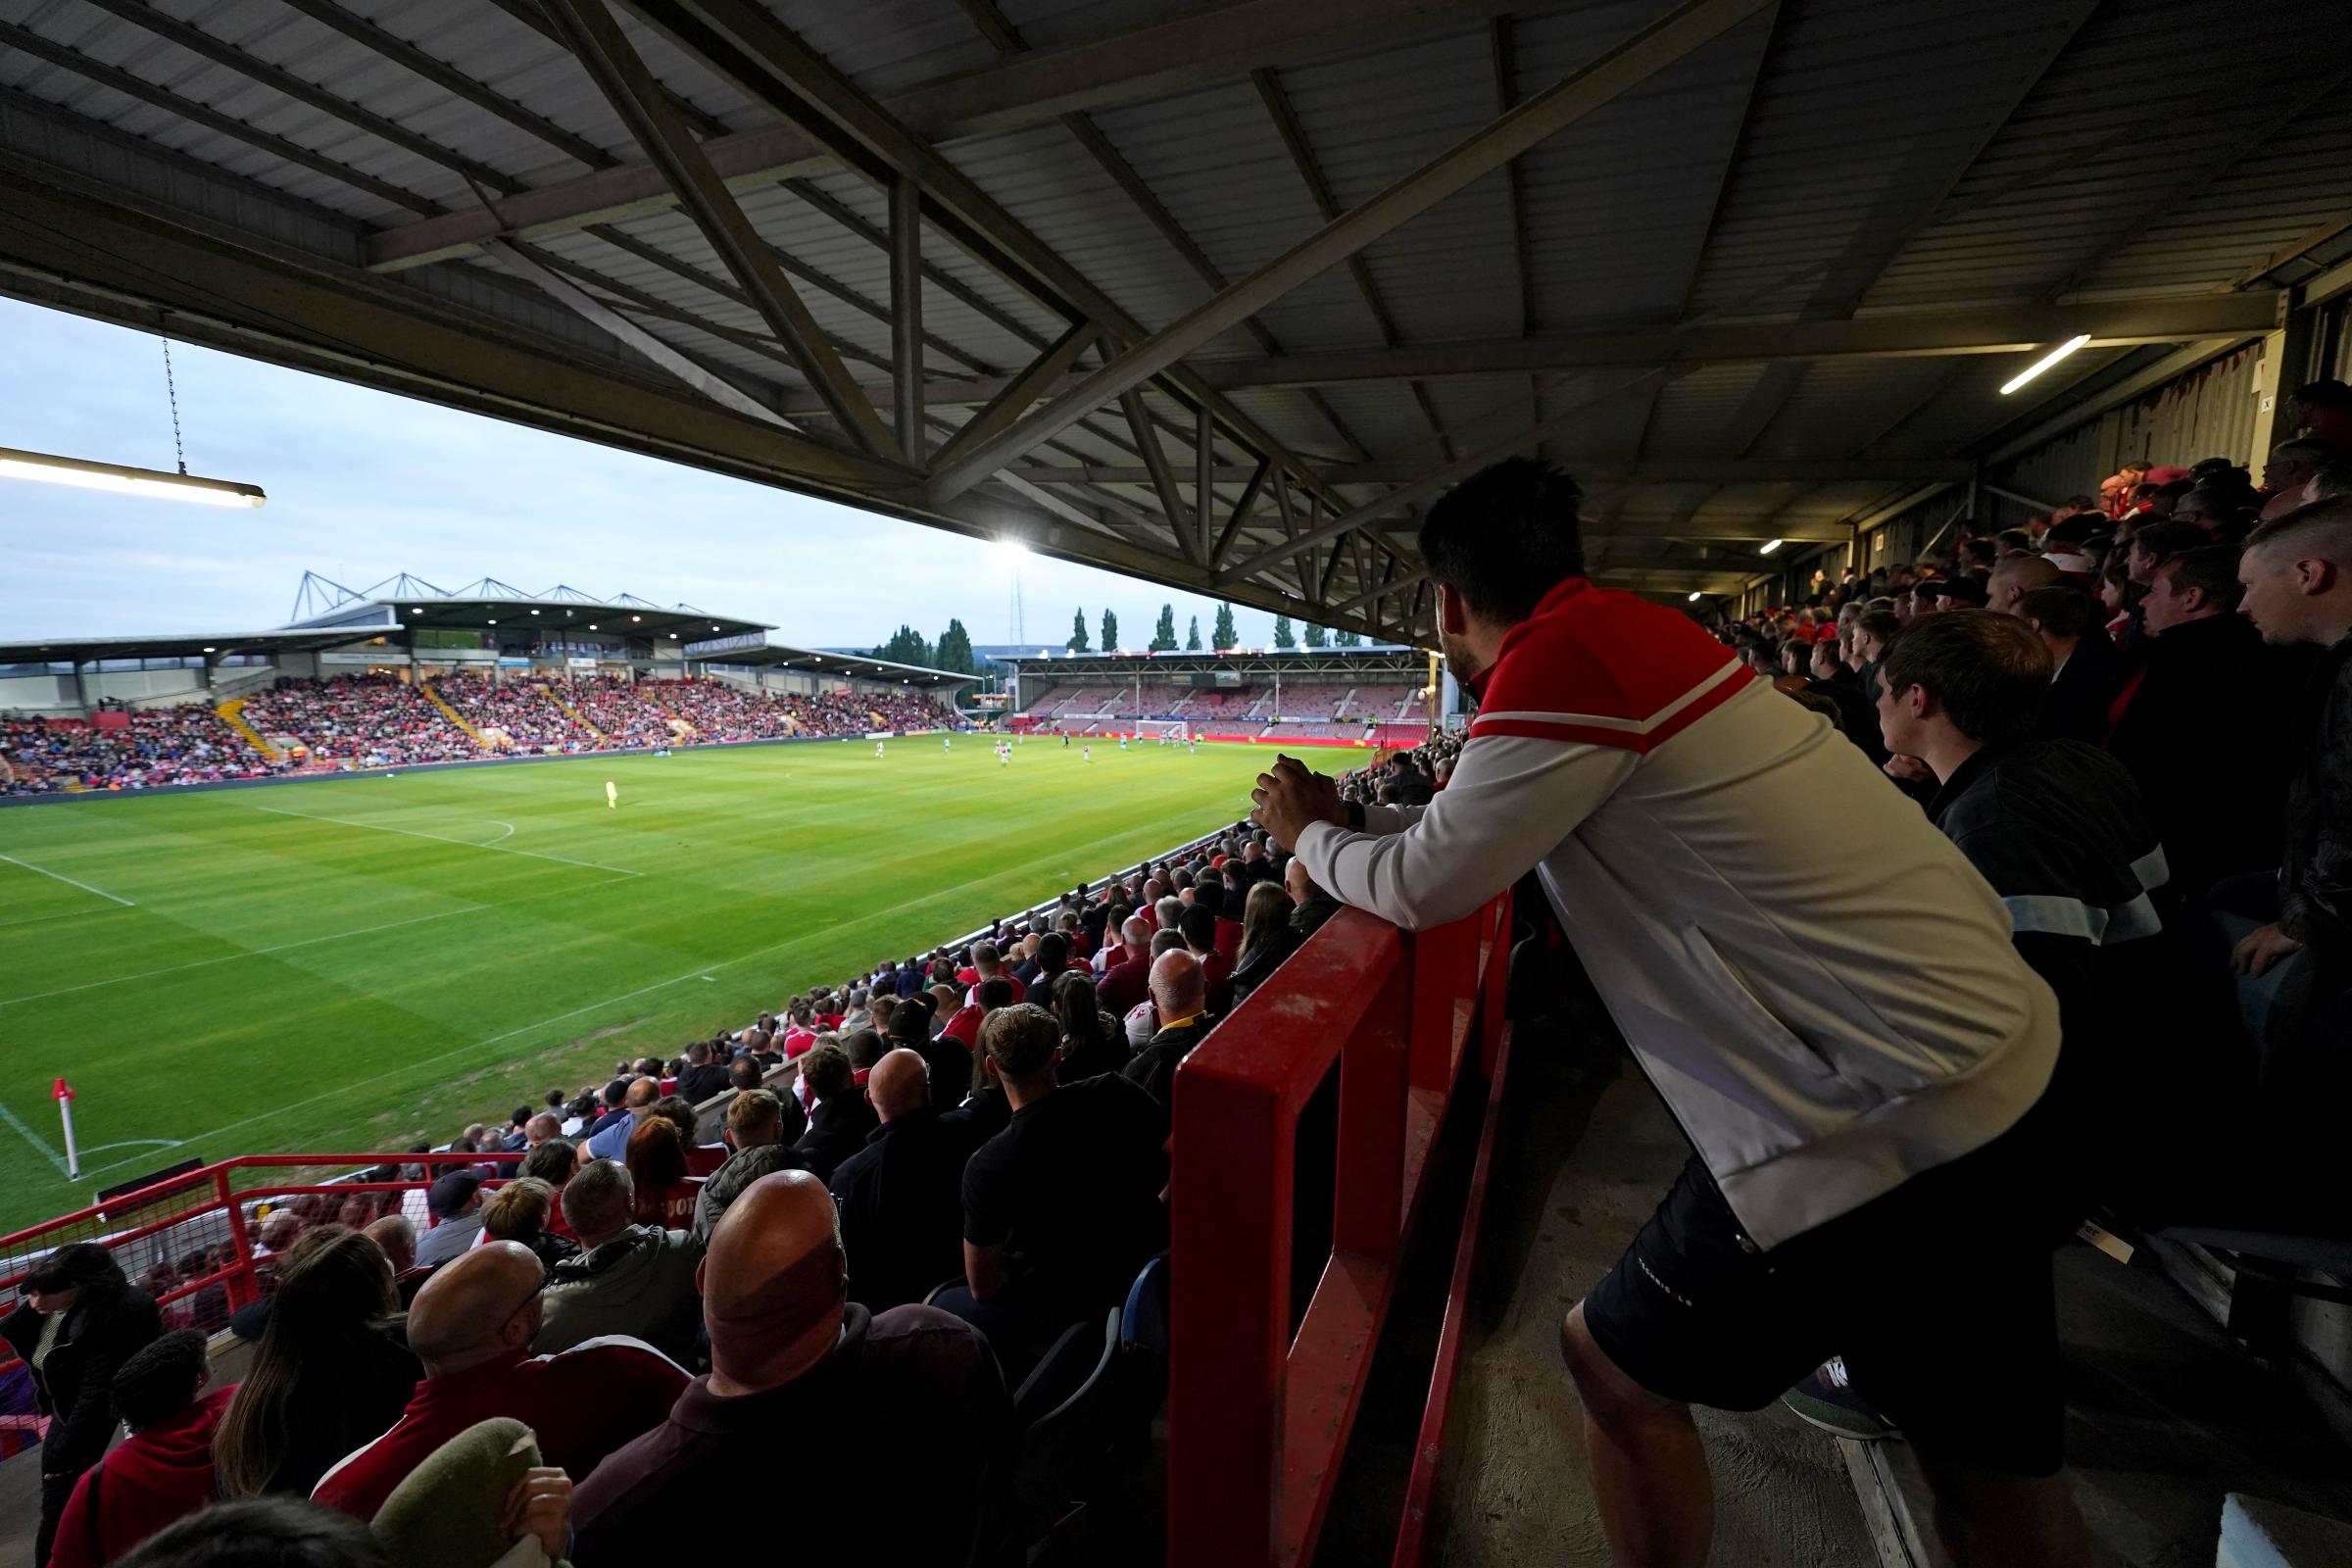 Wrexham fans watch the game from the stands during the Vanarama National League match at The Racecourse Ground, Wrexham. Picture date: Monday August 30, 2021.